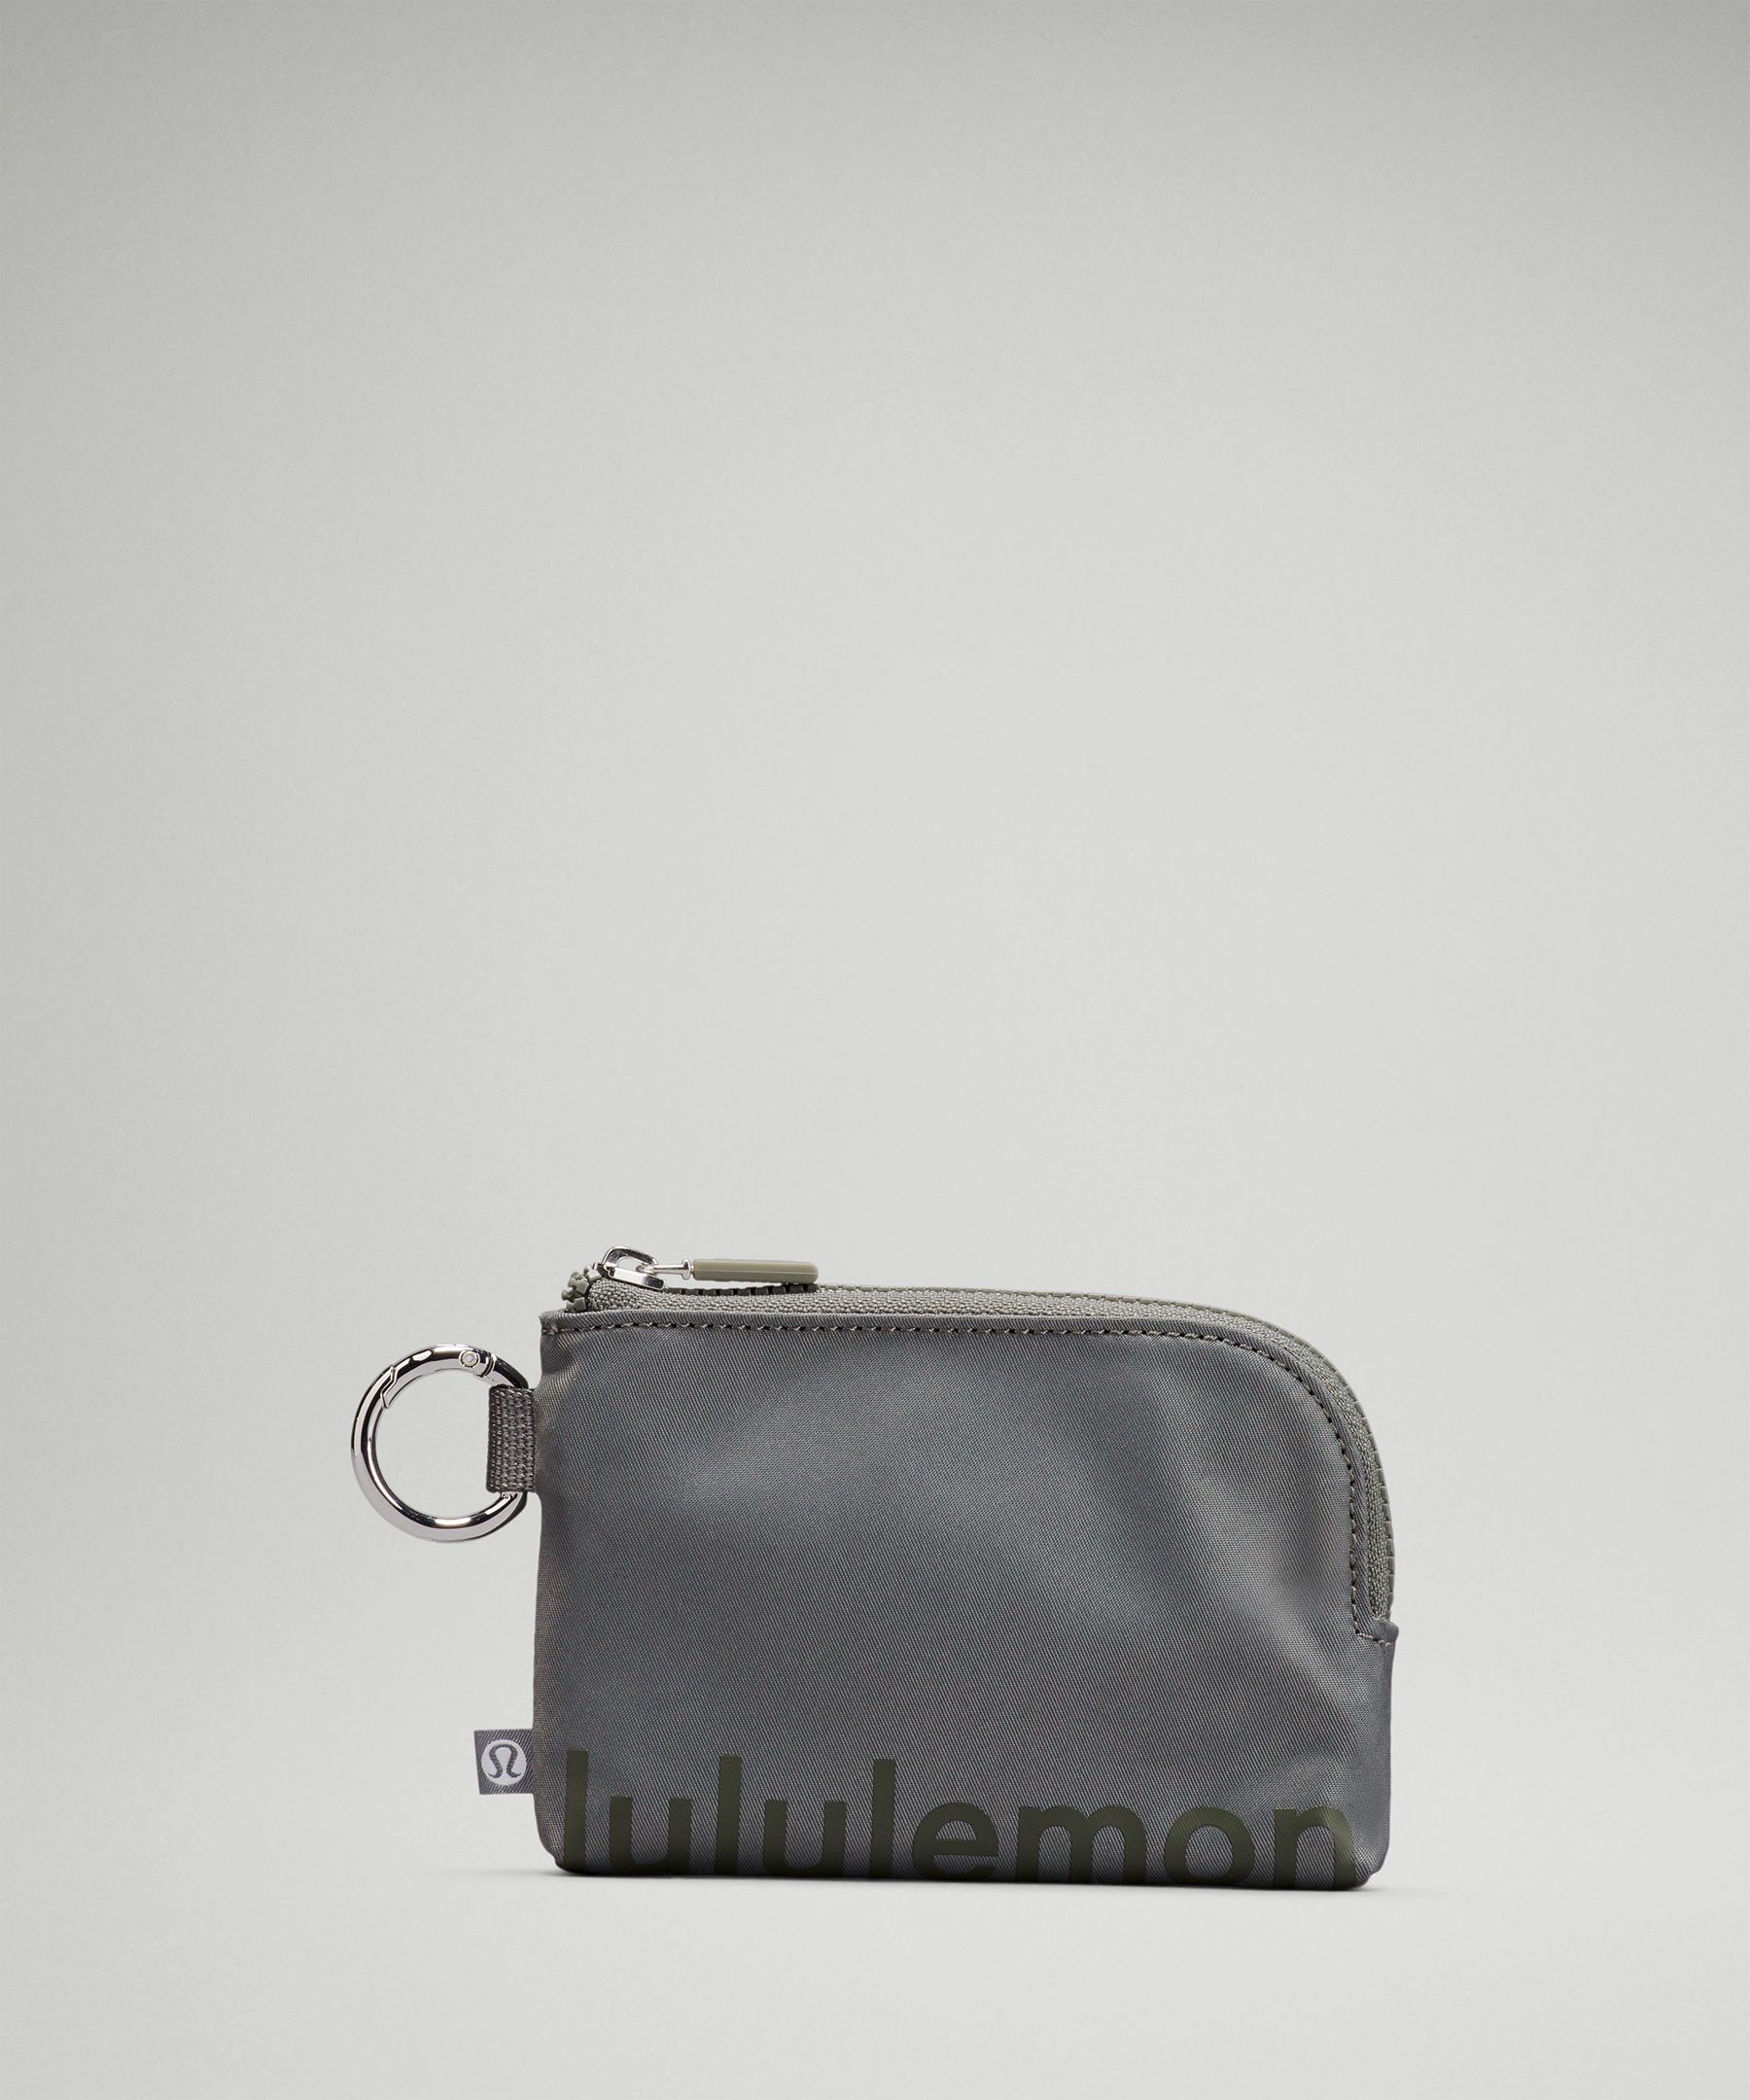 Lululemon Clippable Card Pouch In Grey Sage